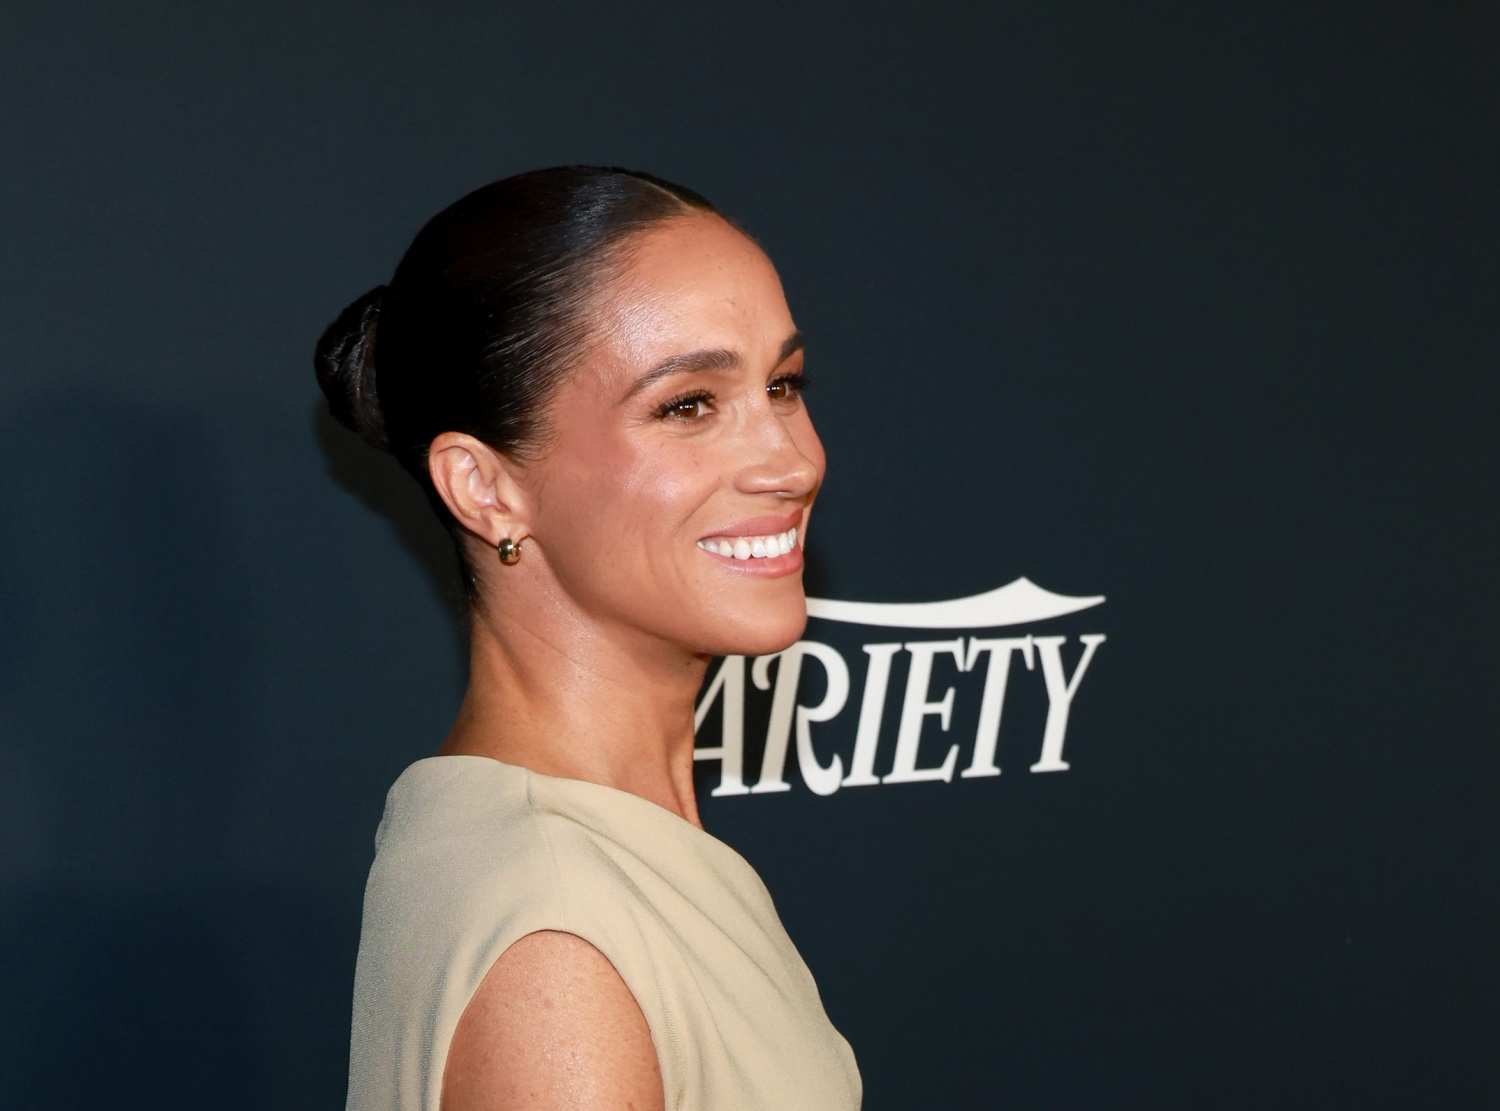 Meghan Markle, Duchess of Sussex 